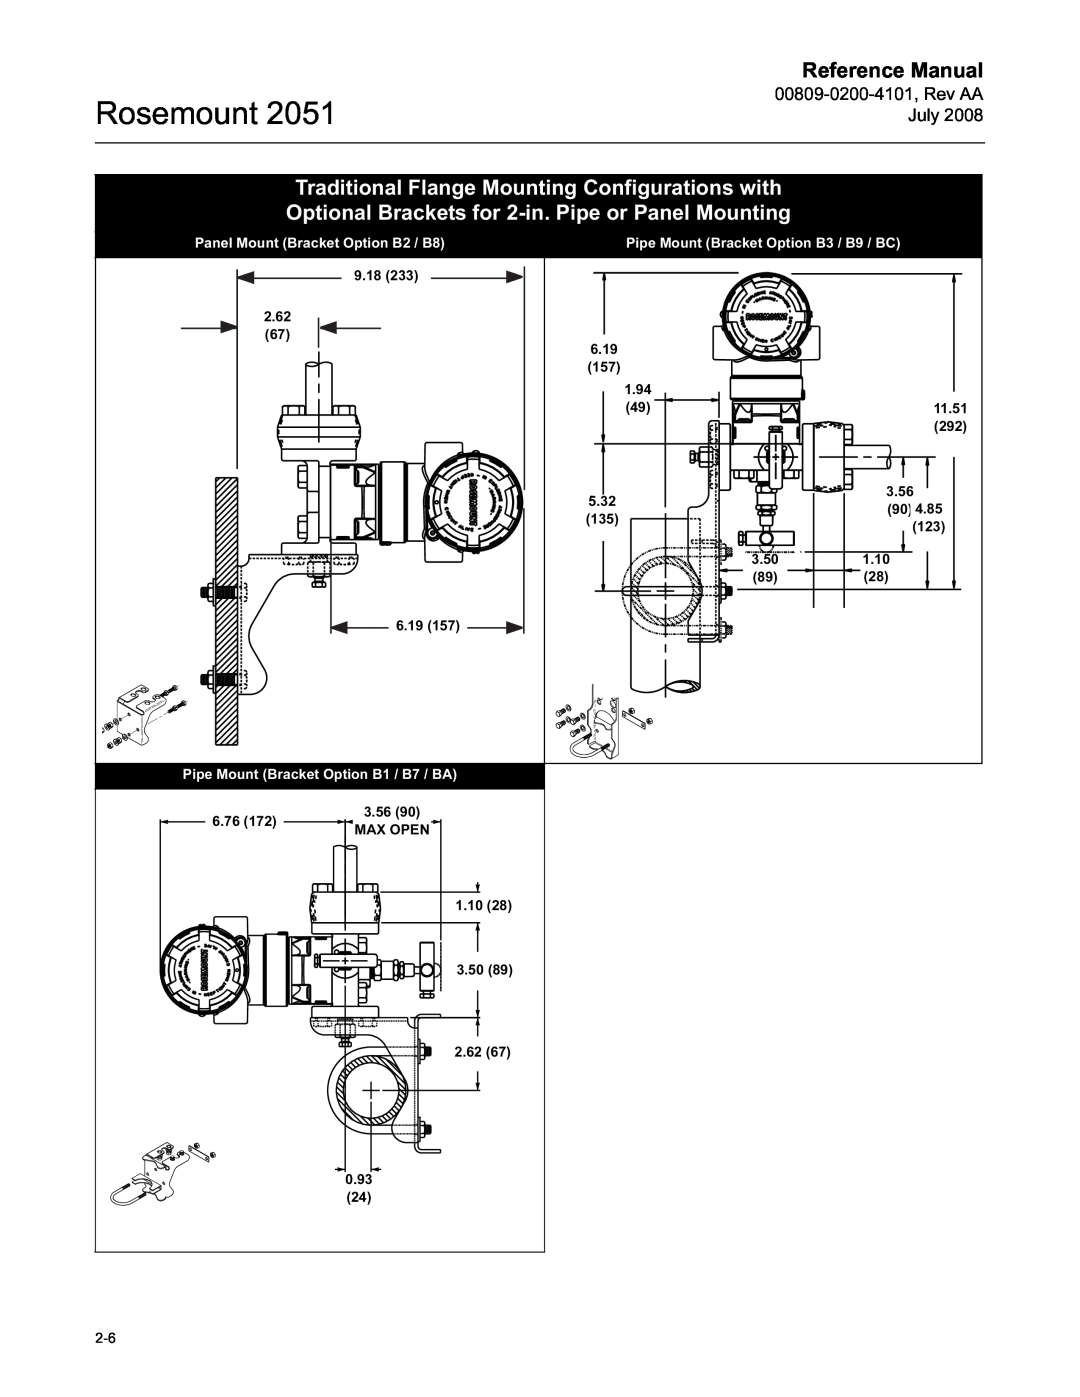 Emerson Process Management 2051 manual Traditional Flange Mounting Configurations with, Rosemount, Reference Manual 